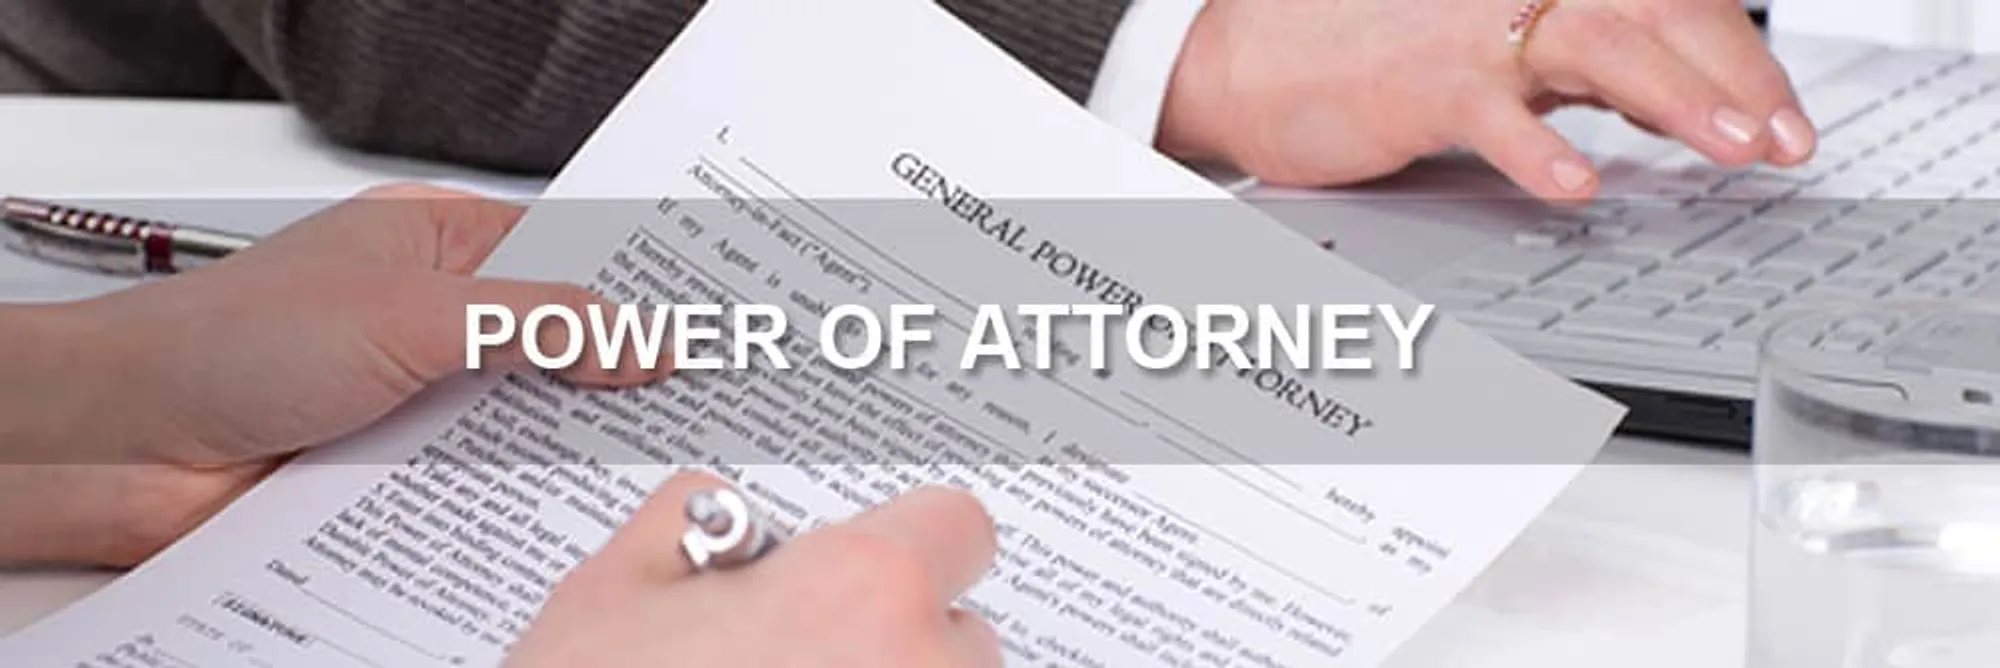 Have you checked where you are handing over your power of attorney?